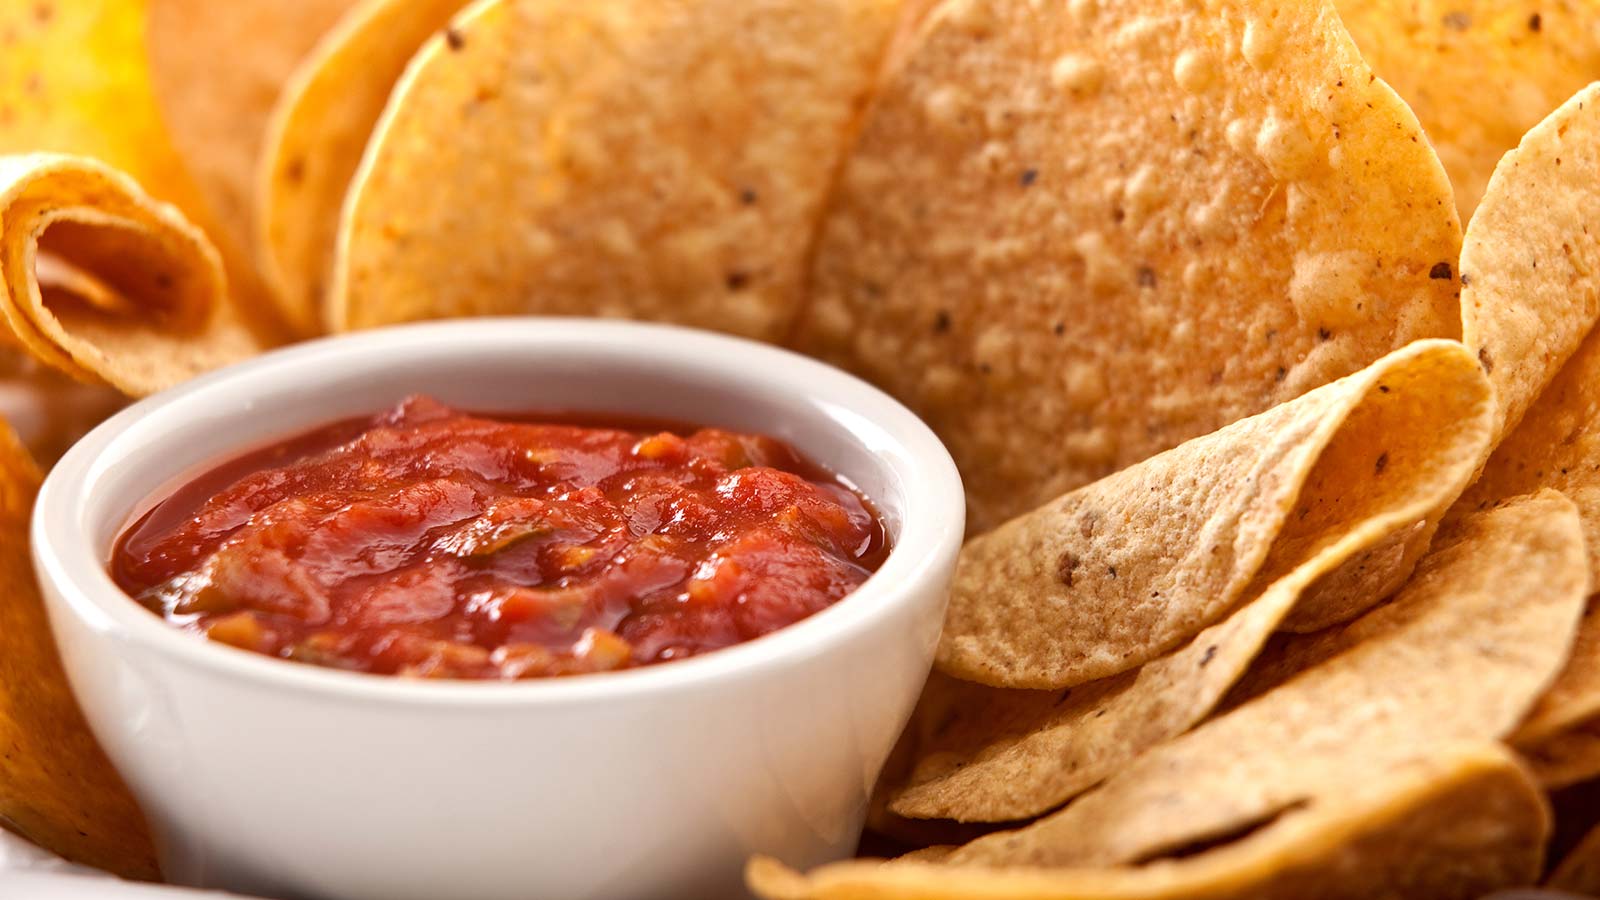 If You've Tried 18 of Condiments & Sauces, You're Real … Quiz Salsa